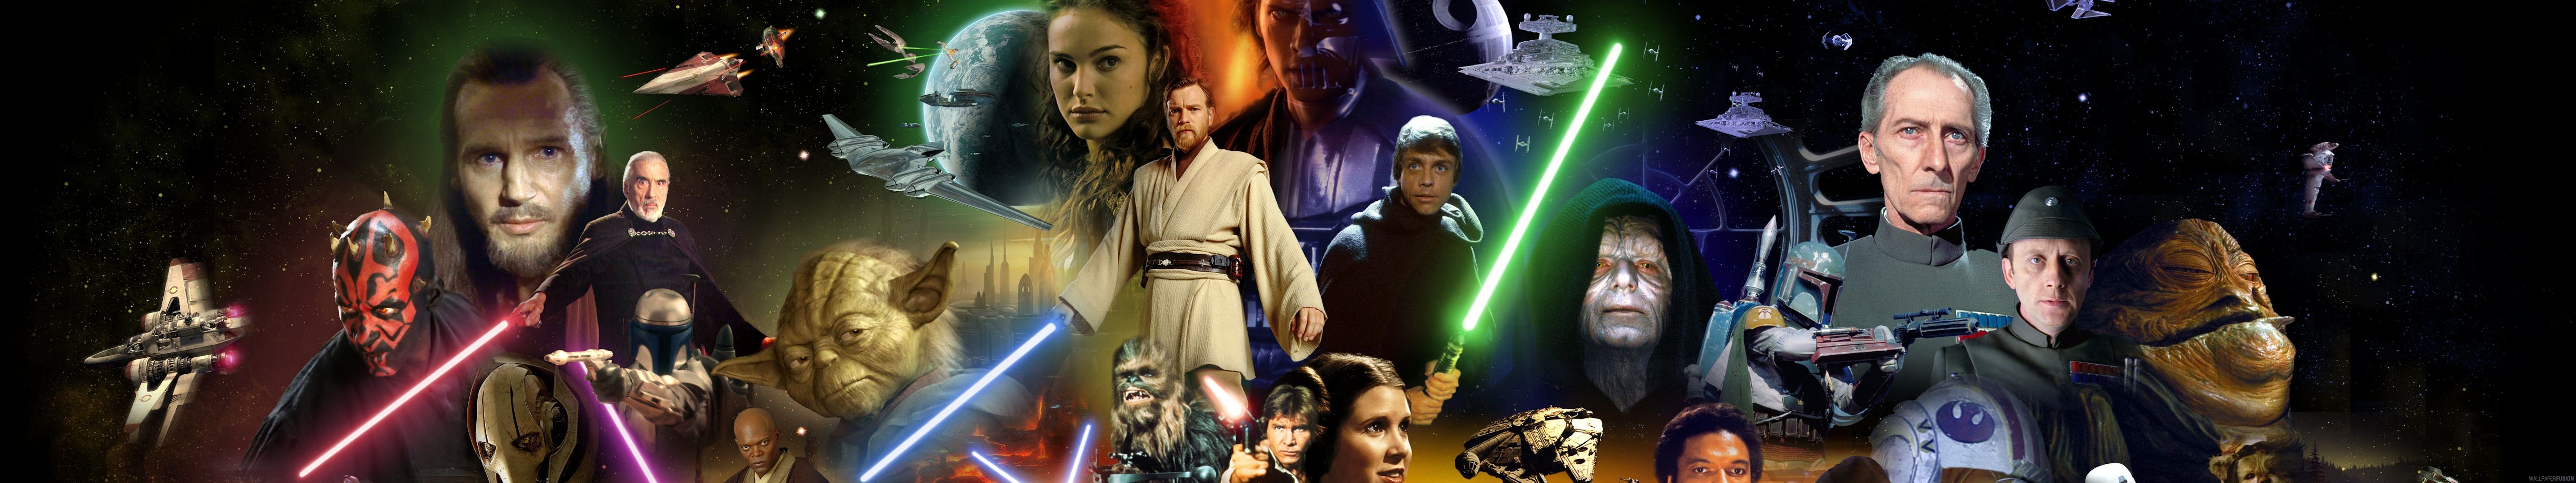 Star Wars Wallpaper Pictures